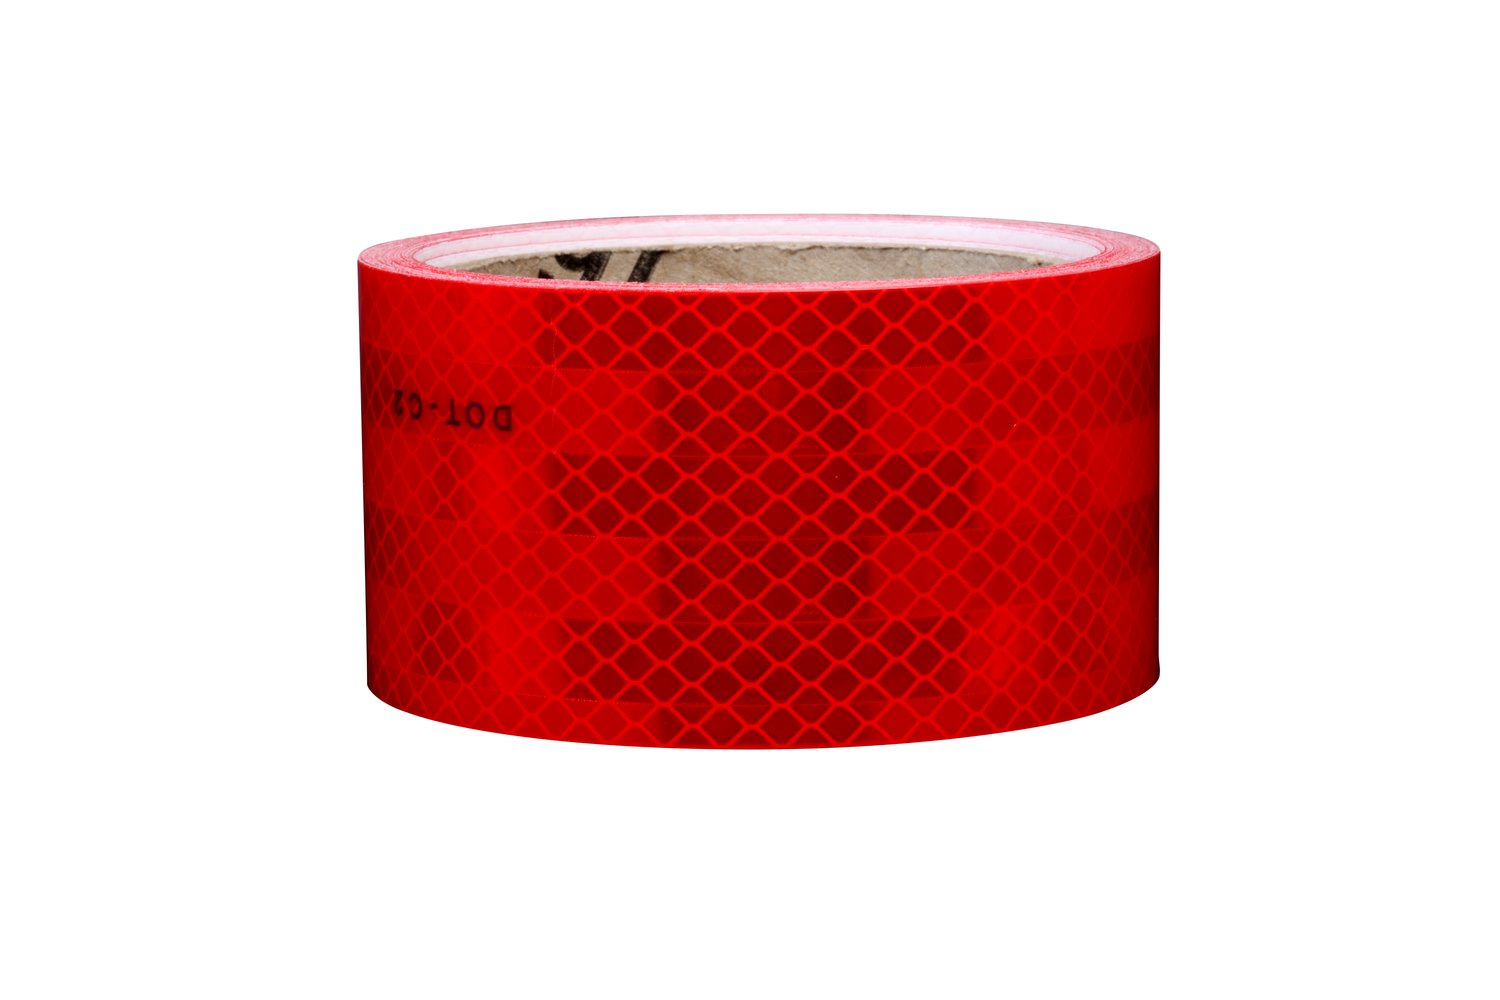 7100150472 - 3M Diamond Grade Conspicuity Markings 983-72, Red, 2 in x 50 yd,
kiss-cut every 4.5 in